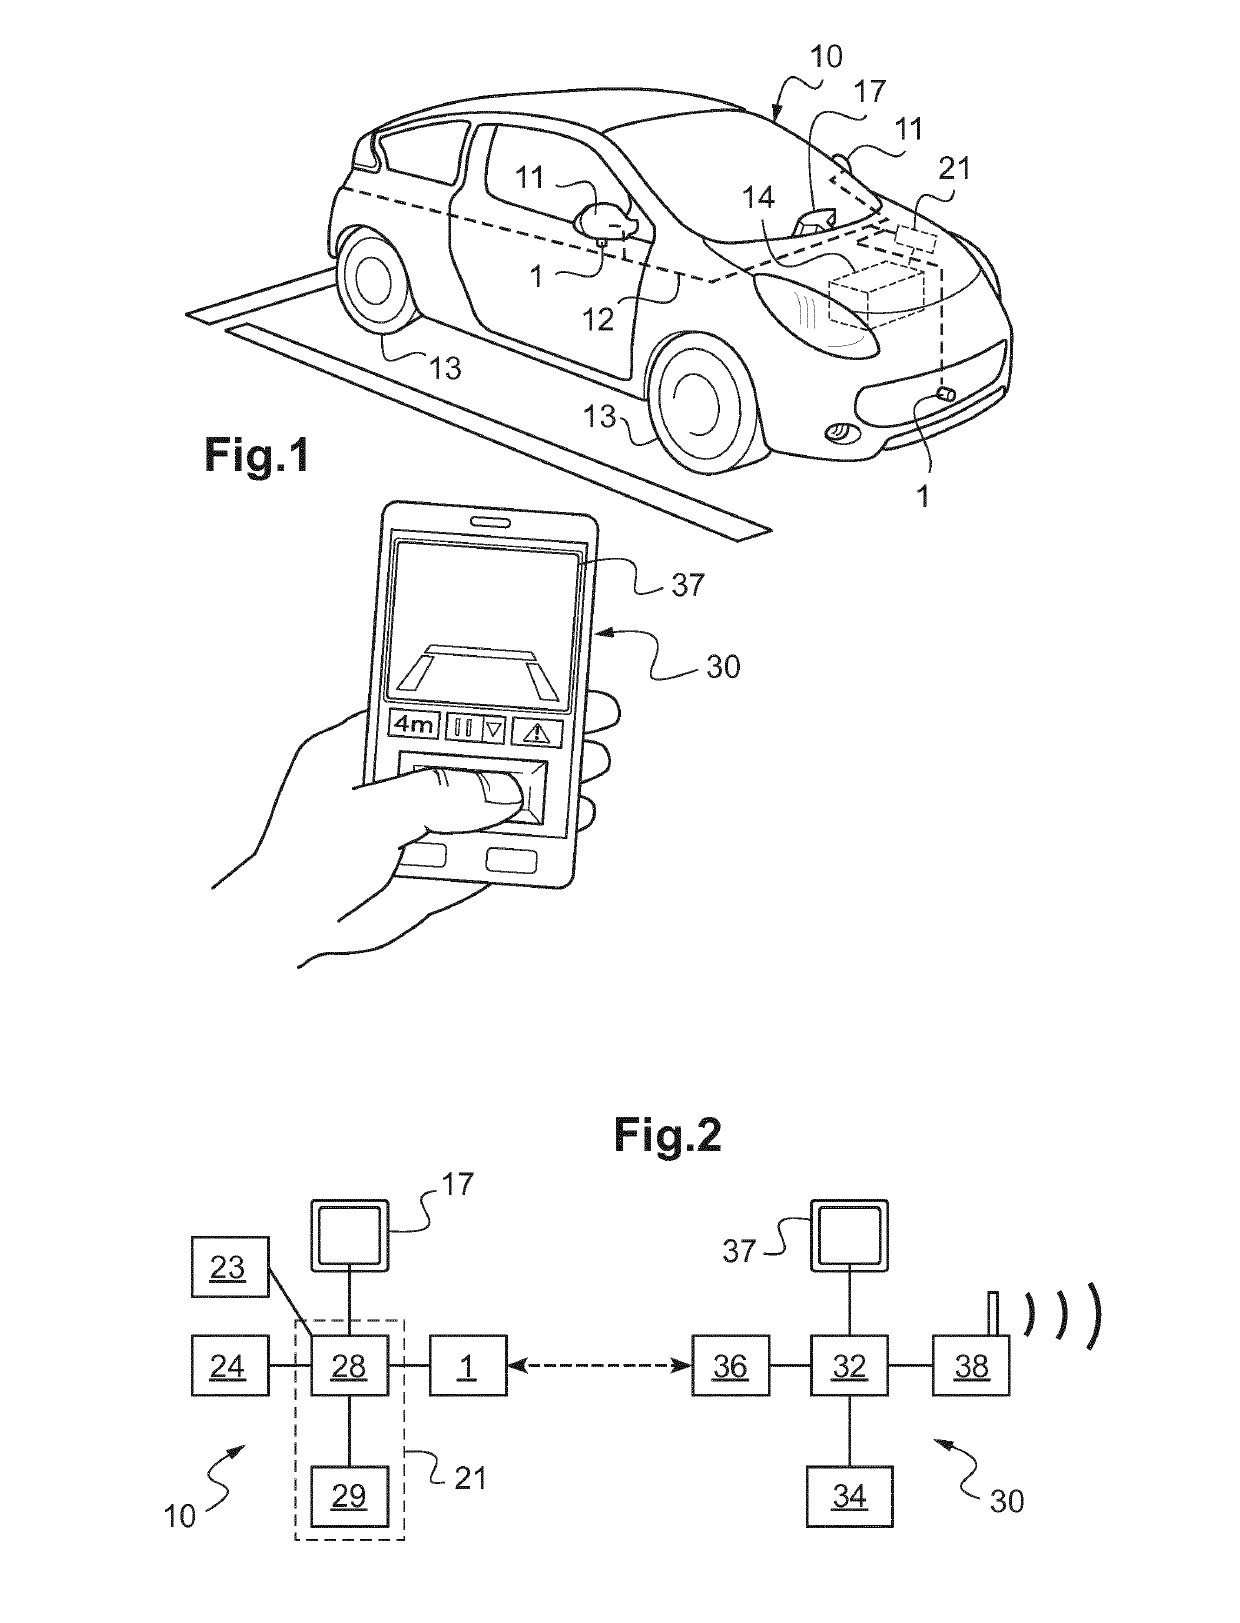 Electronic parking assistance device for a motor vehicle